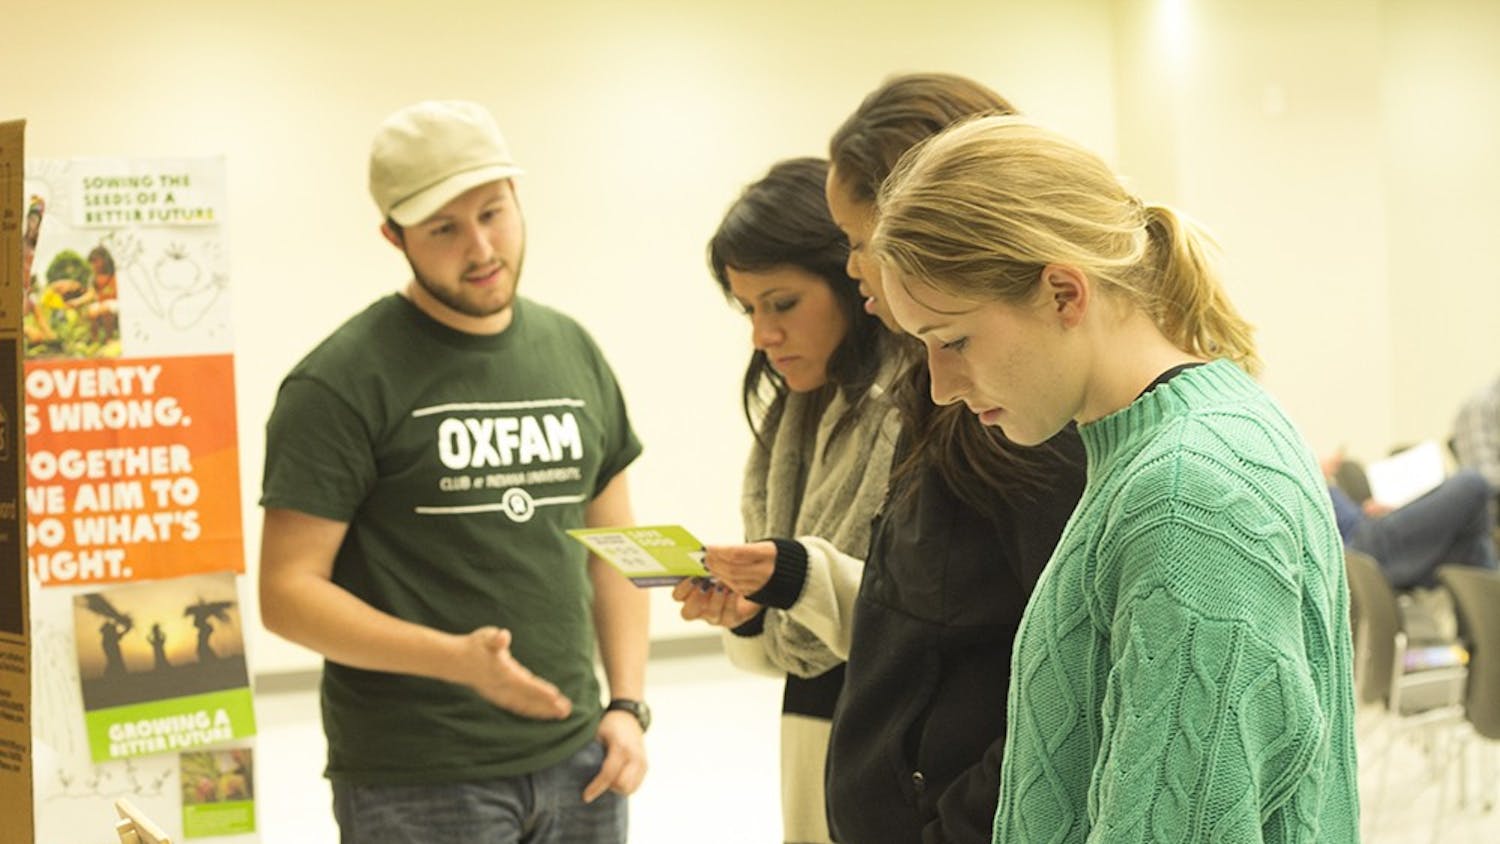 Students check out more information about Oxfam America, a global organization working to right the wrongs of poverty and hunger, while attending its 4th annual hunger banquet Tuesday in the Union Street Auditorium.